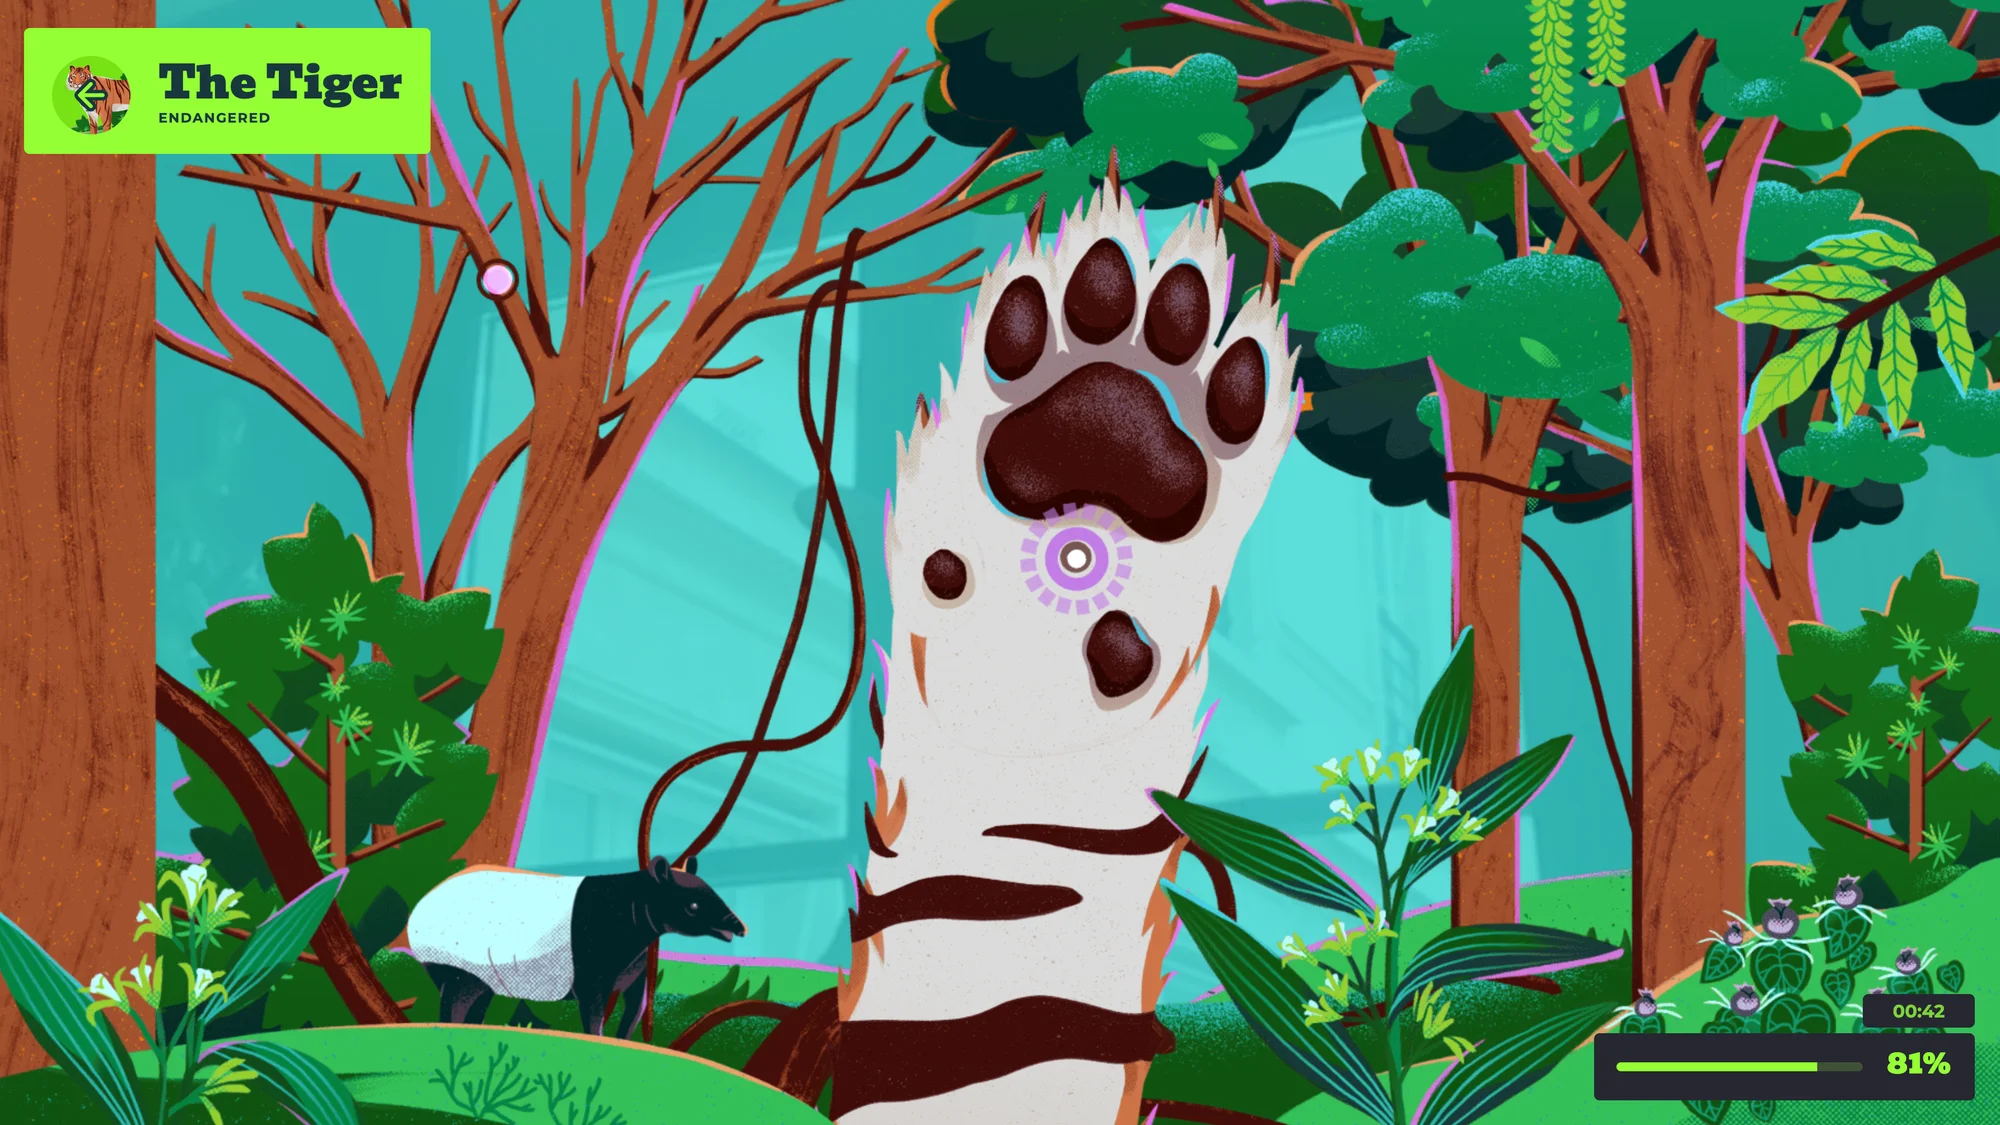 An illustration of a green forest, with plants in the foreground, trees in the background, and a Tapir to the left. In the center, a giant tiger paw is helping to revive some dead trees with new leaves.